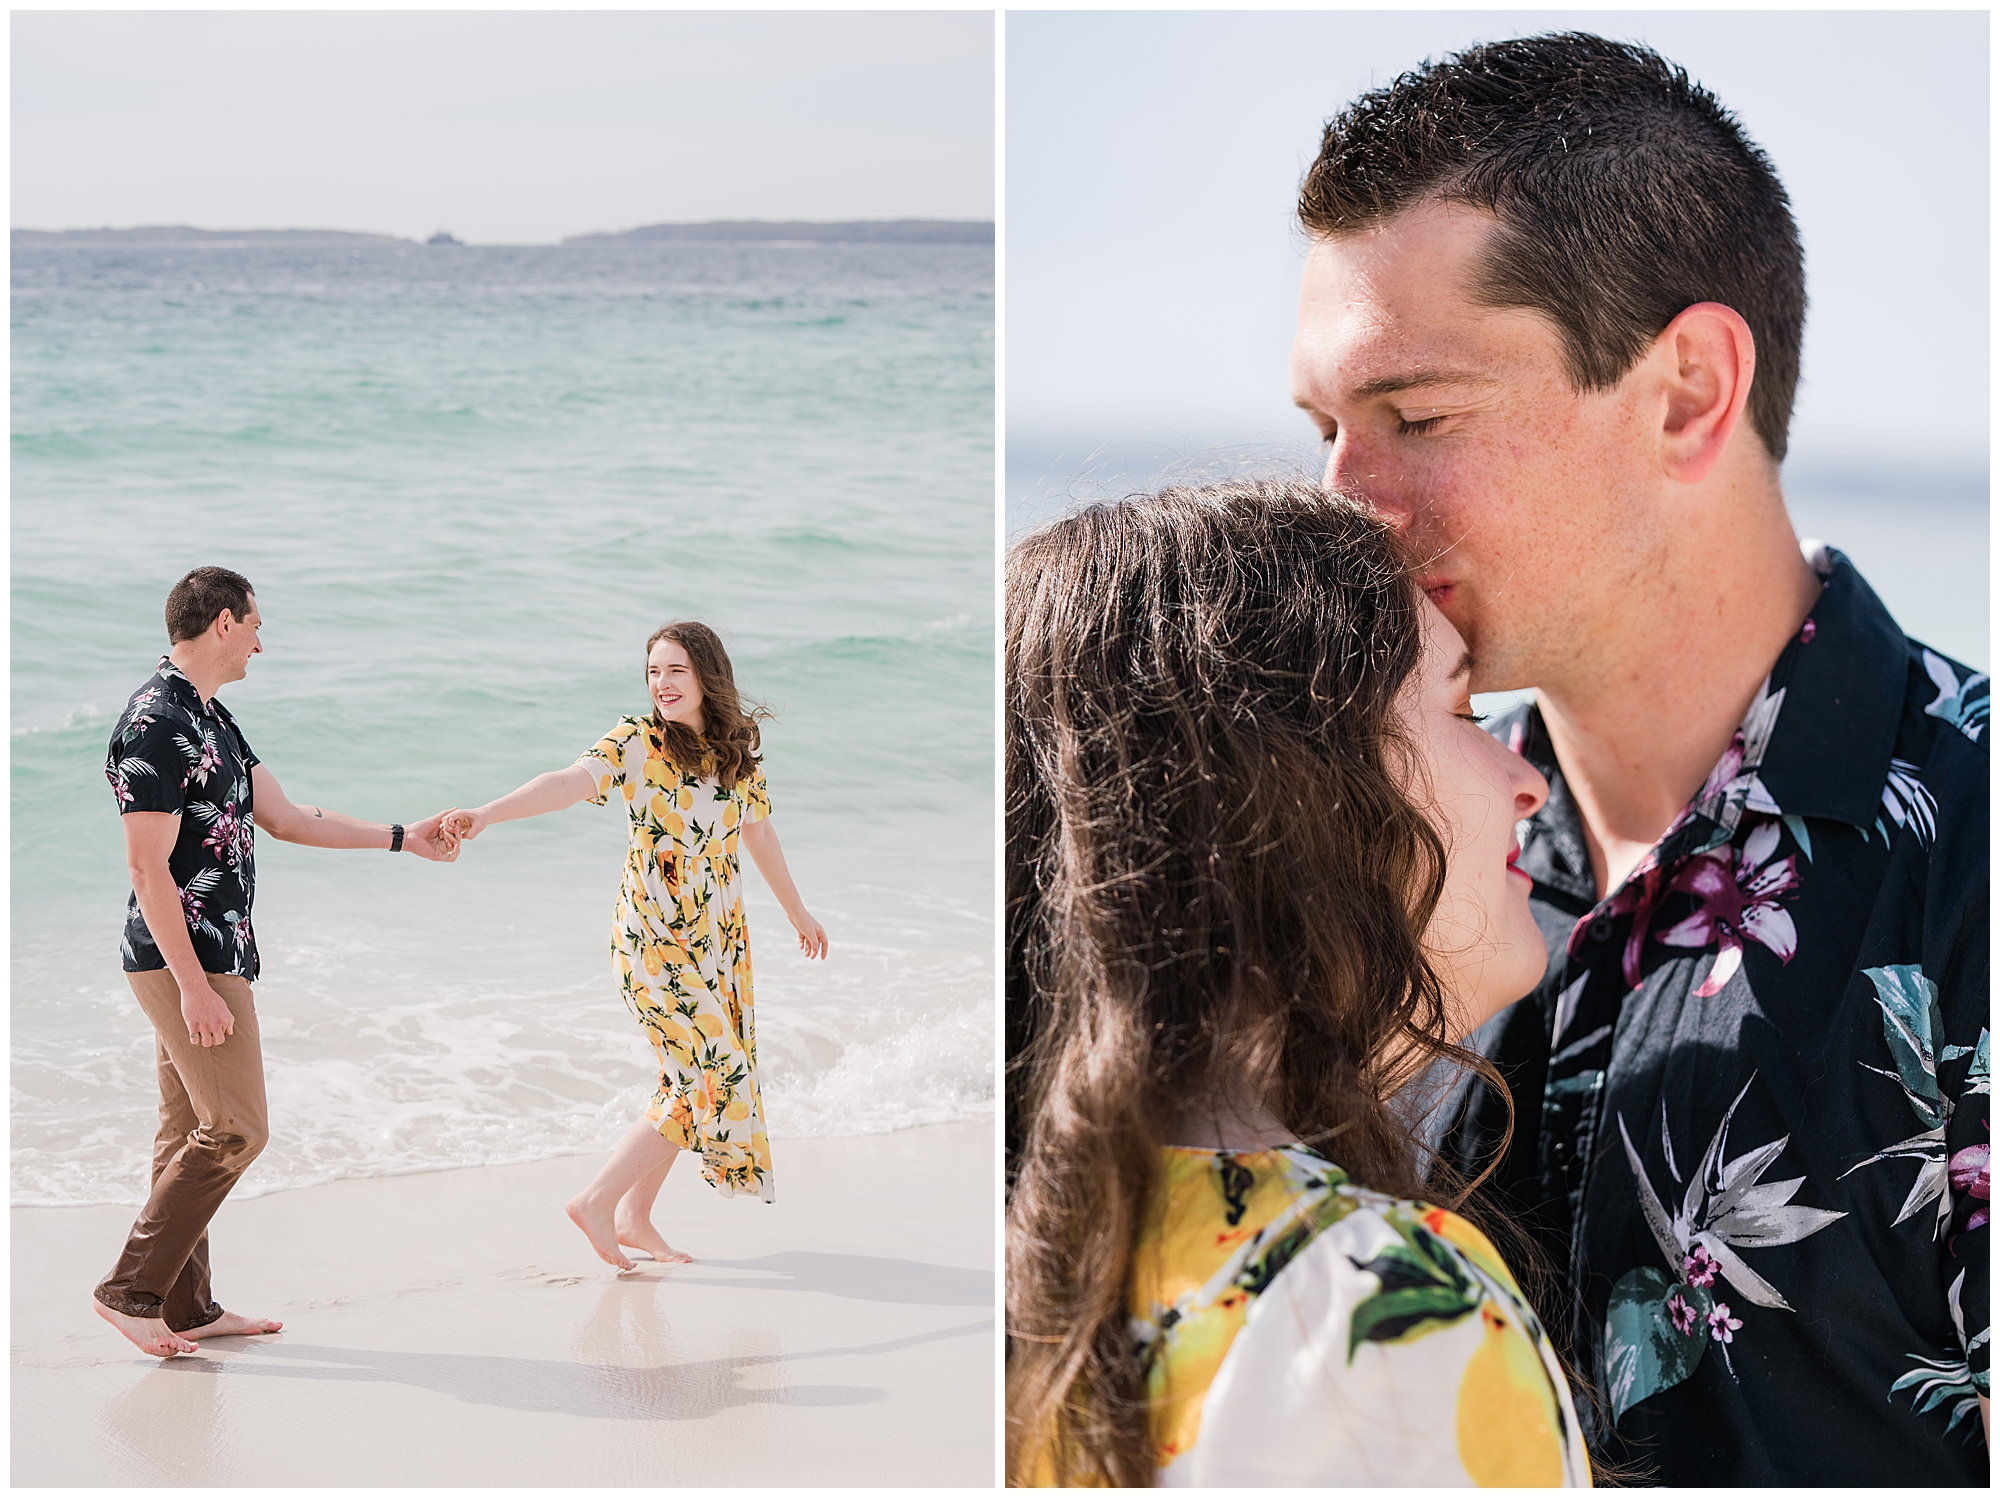 Fun engagement session on the beach